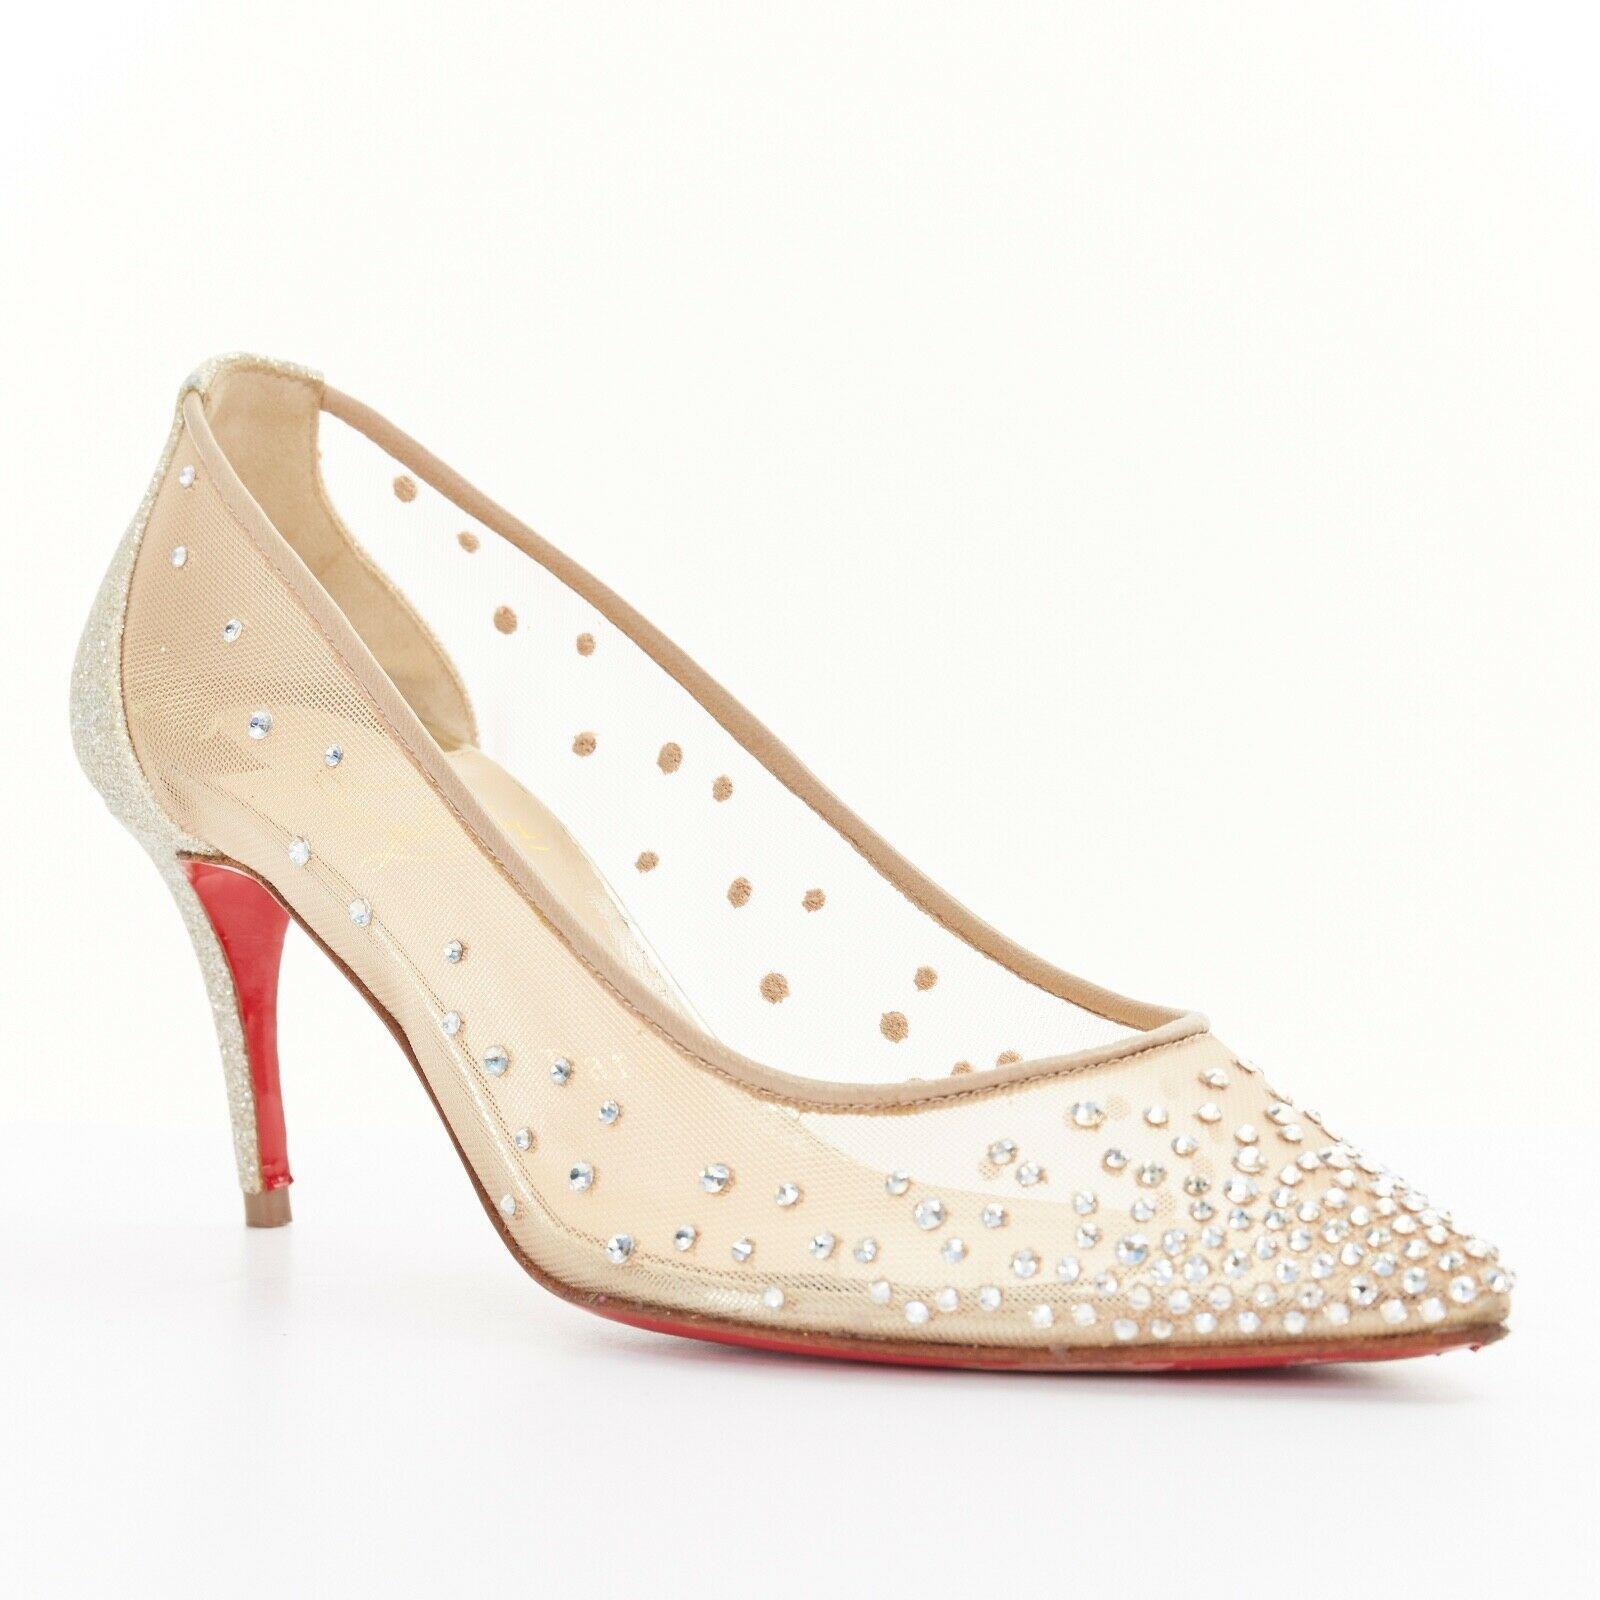 CHRISTIAN LOUBOUTIN Follies Strass 70 nude mesh crystal gold bridal heel EU34
CHRISTIAN LOUBOUTIN
Follies Strass 70. Fine gold glitter leather covered heel. 
Sheer nude mesh upper. 
Gradient strass crystal embellishment- each crystal is embellished